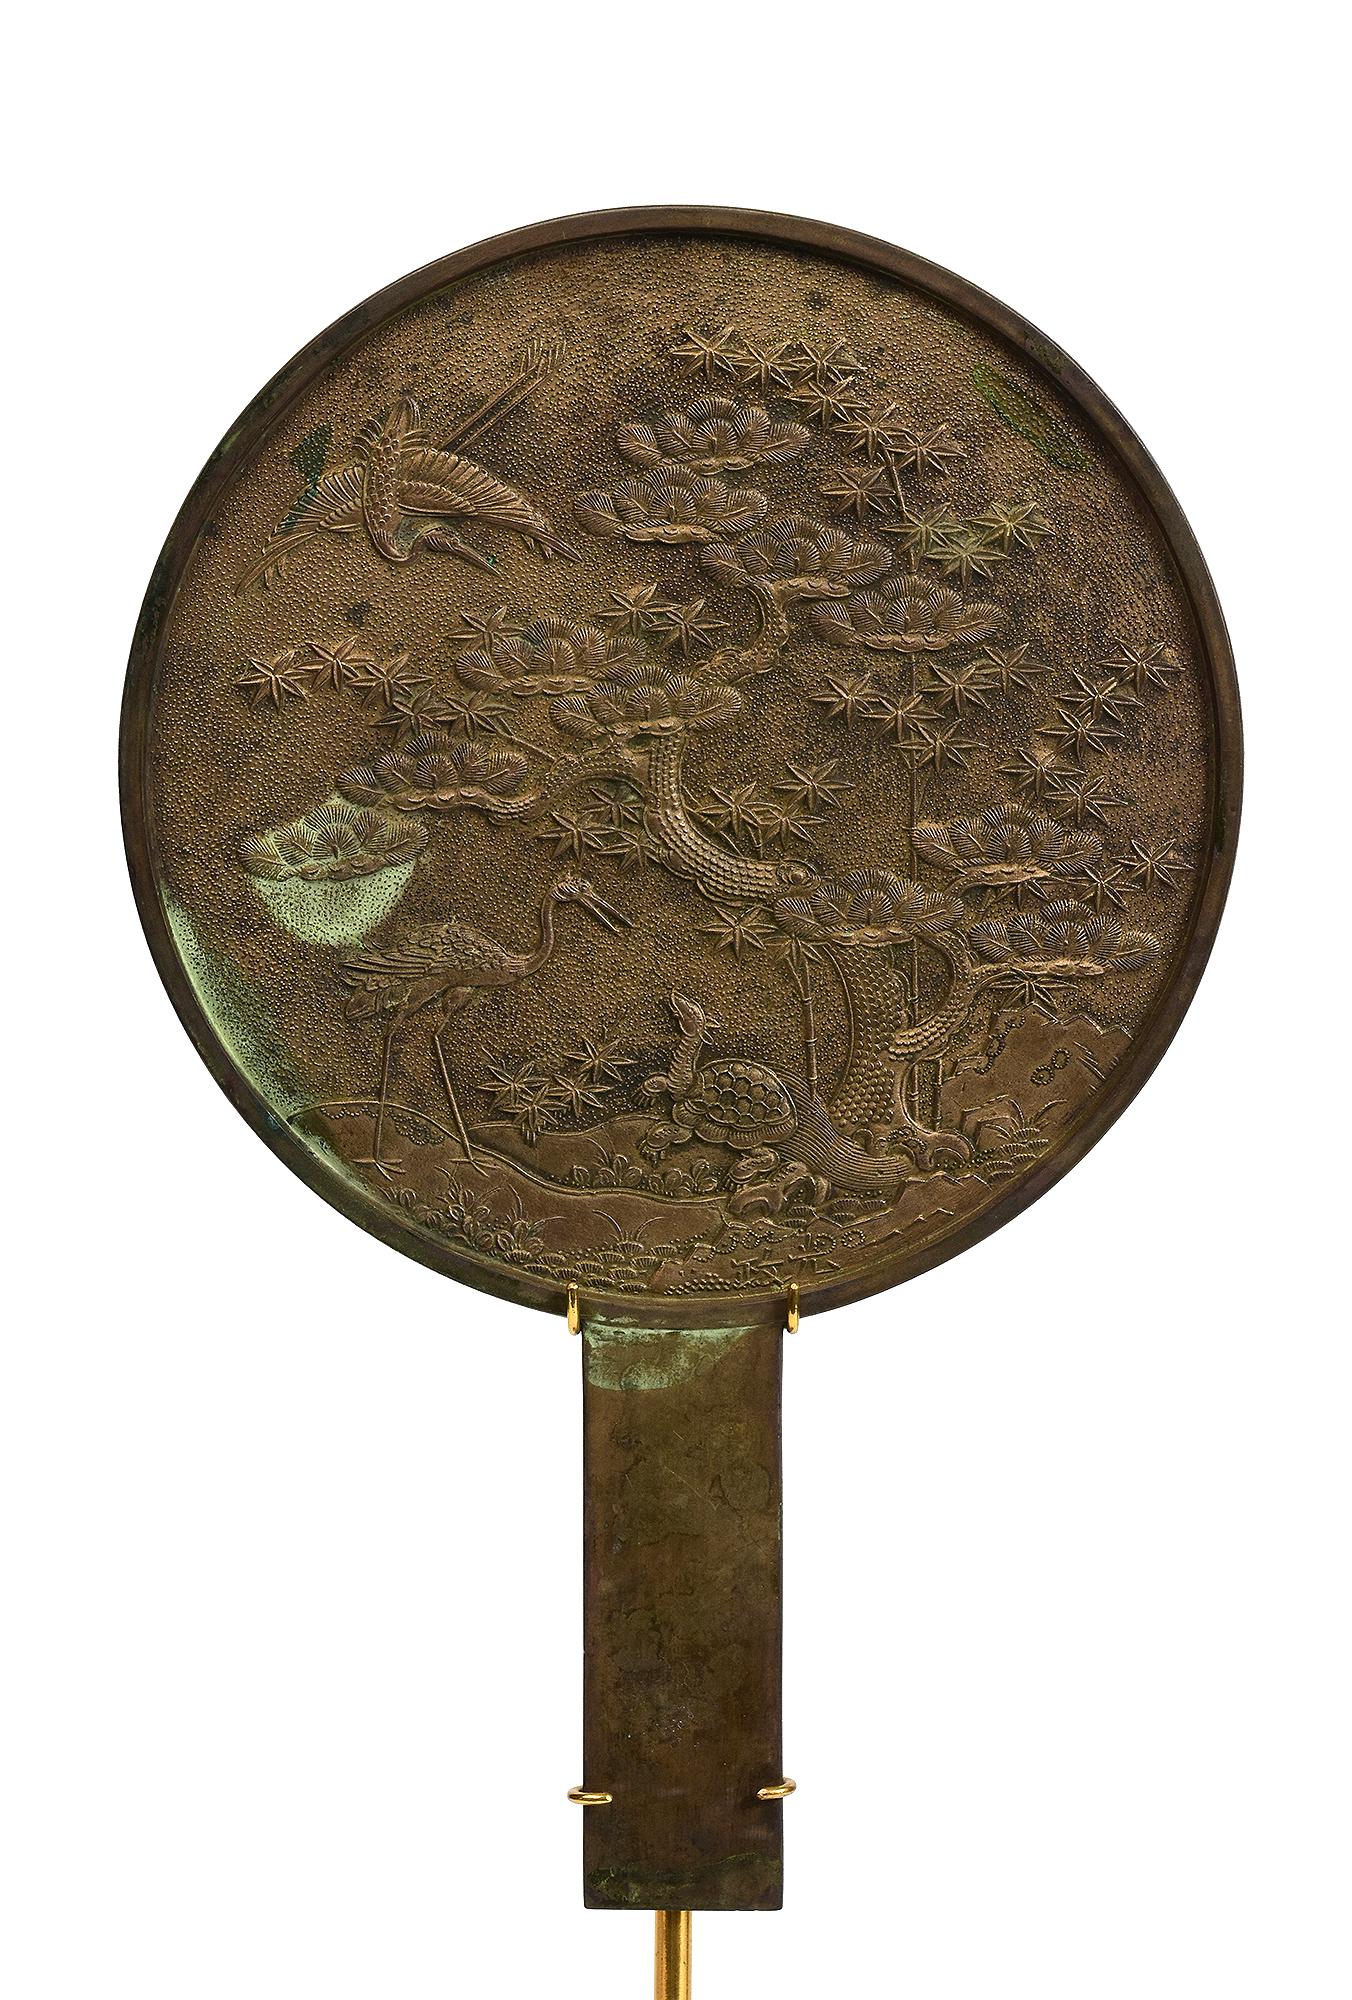 Japanese bronze mirror with stand.

Age: Japan, Showa Period, Early 20th Century
Size of mirror only: Diameter 18 C.M. / Height 27.8 C.M.
Size including stand: Height 43.3 C.M.
Condition: Nice condition overall.